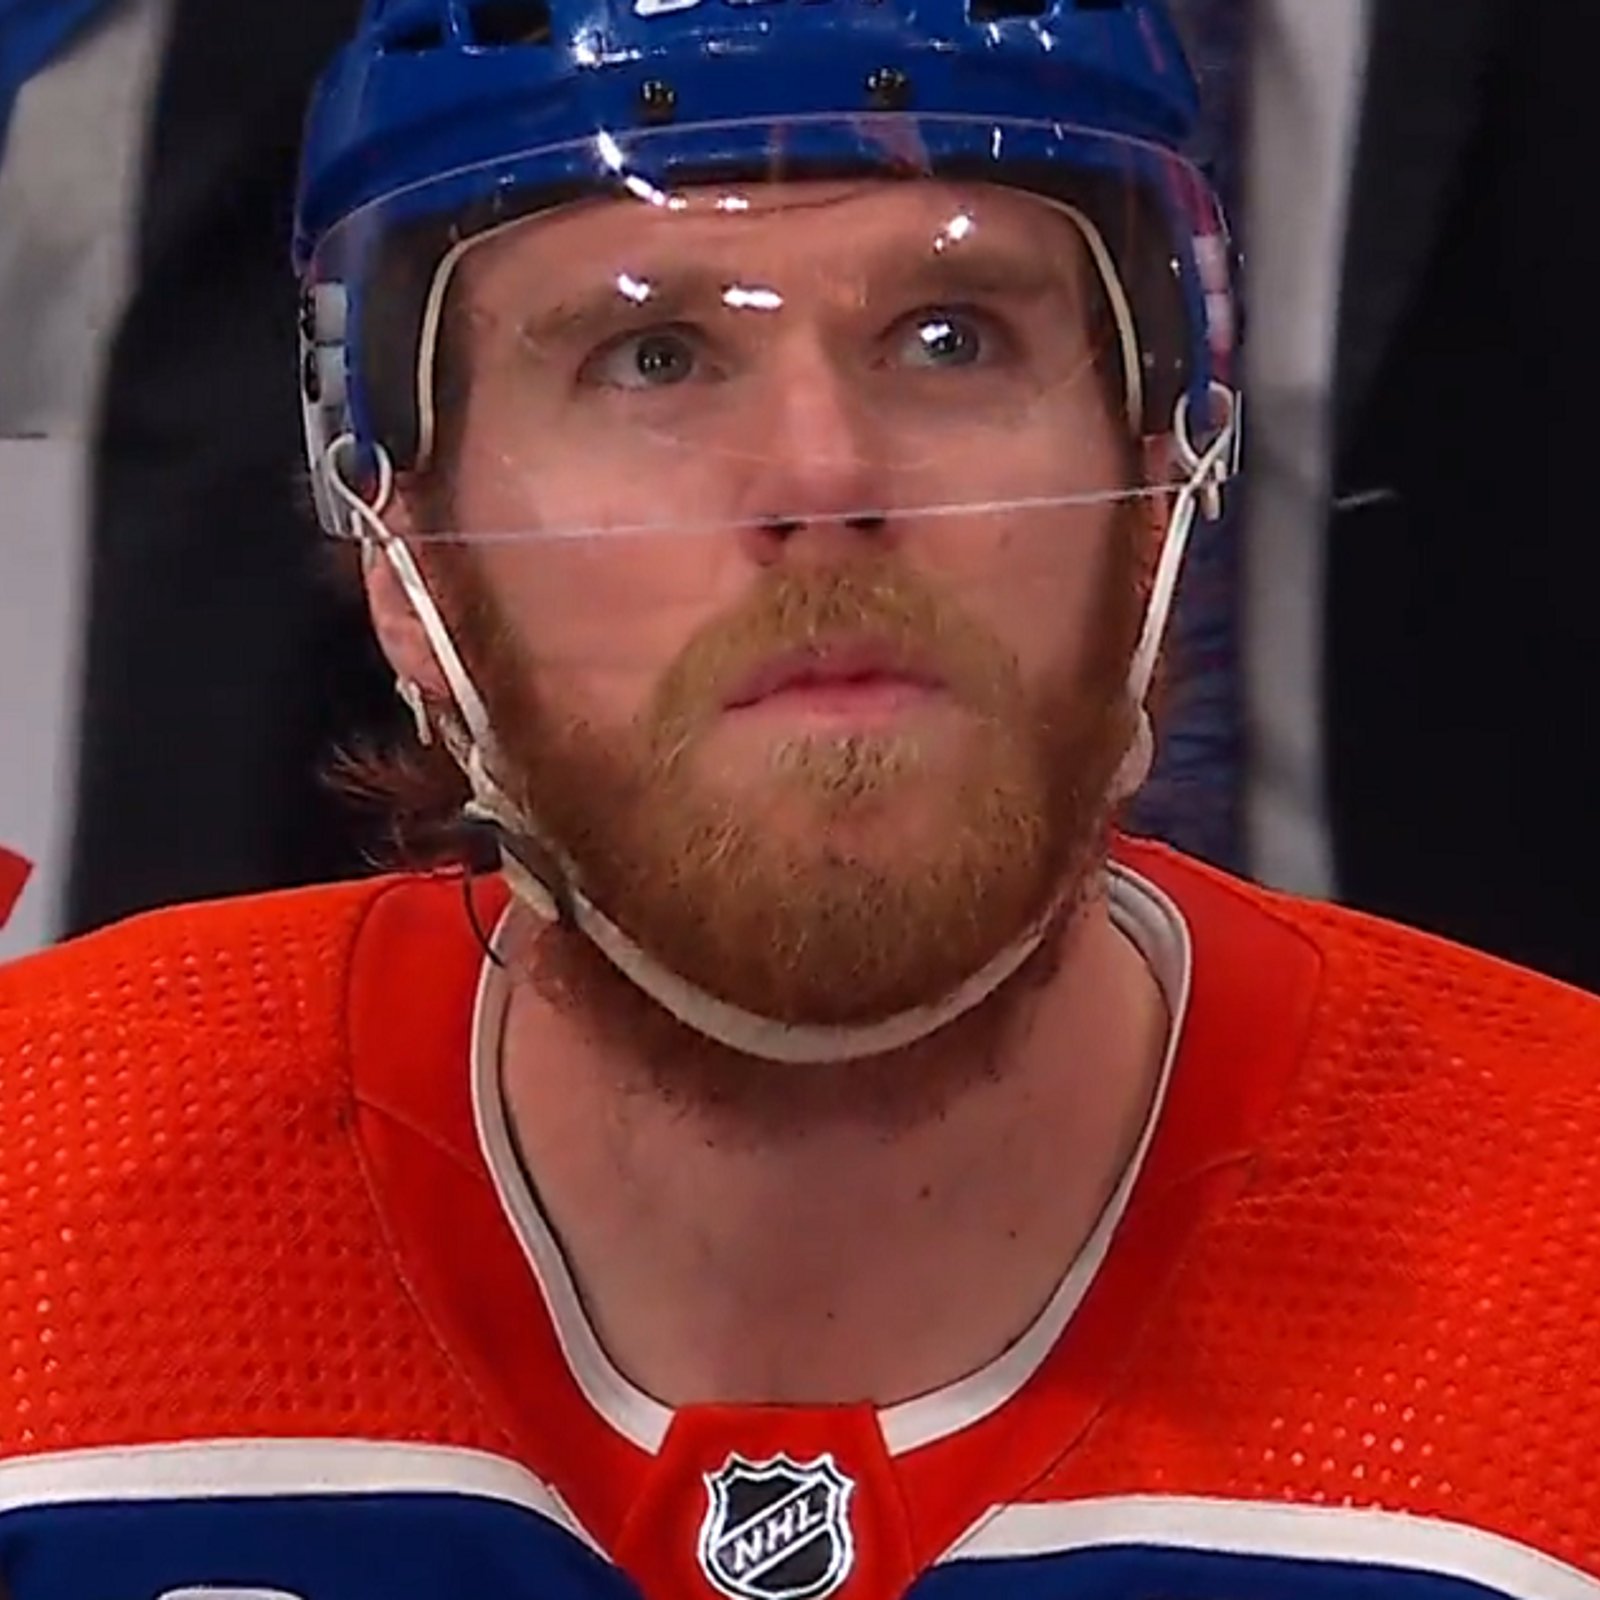 The real reason Connor McDavid snubbed the Conn Smythe.